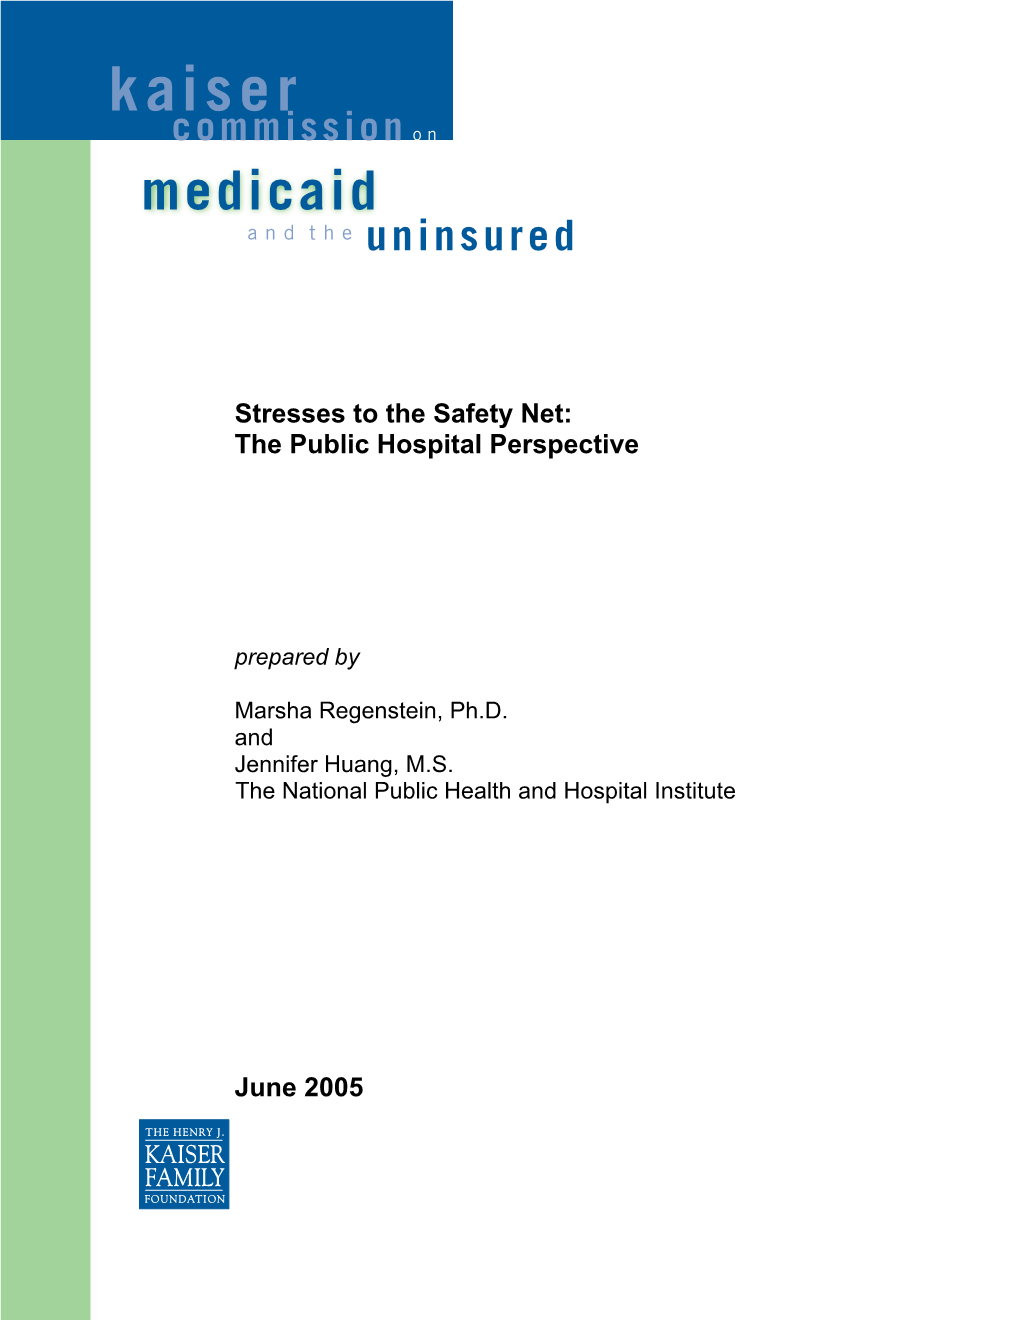 Stresses to the Safety Net: the Public Hospital Perspective